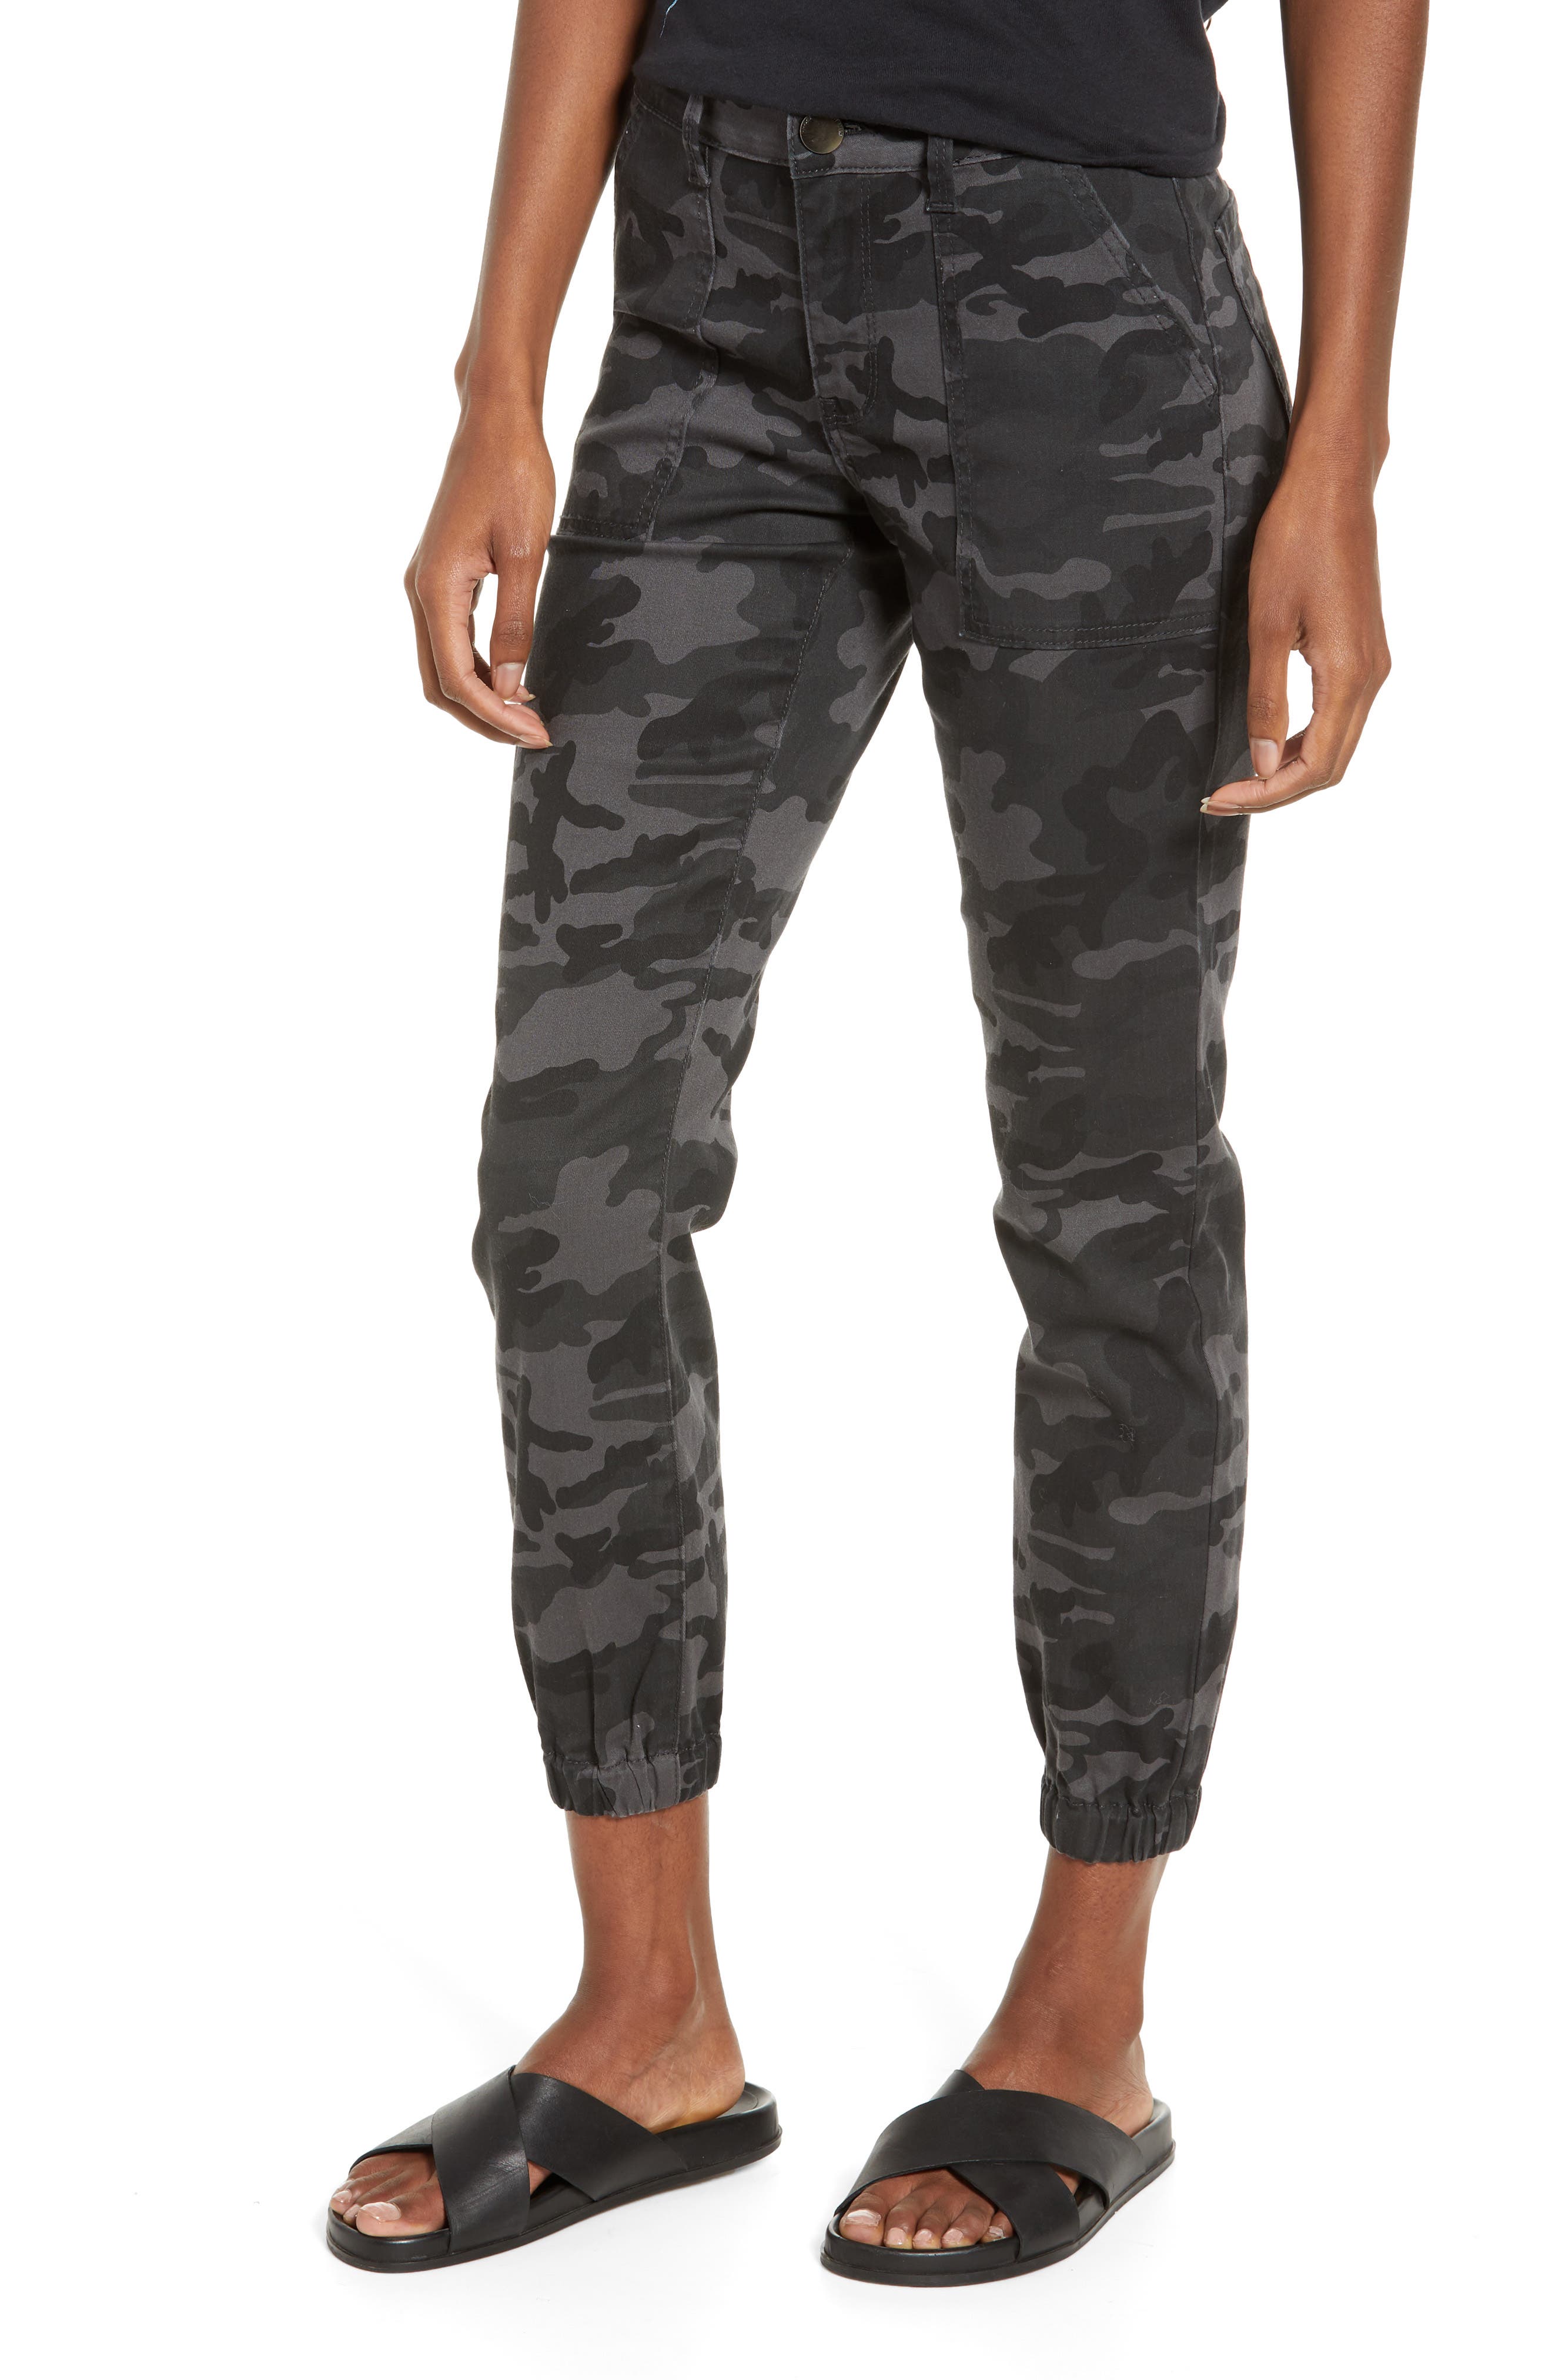 grey camouflage jeans